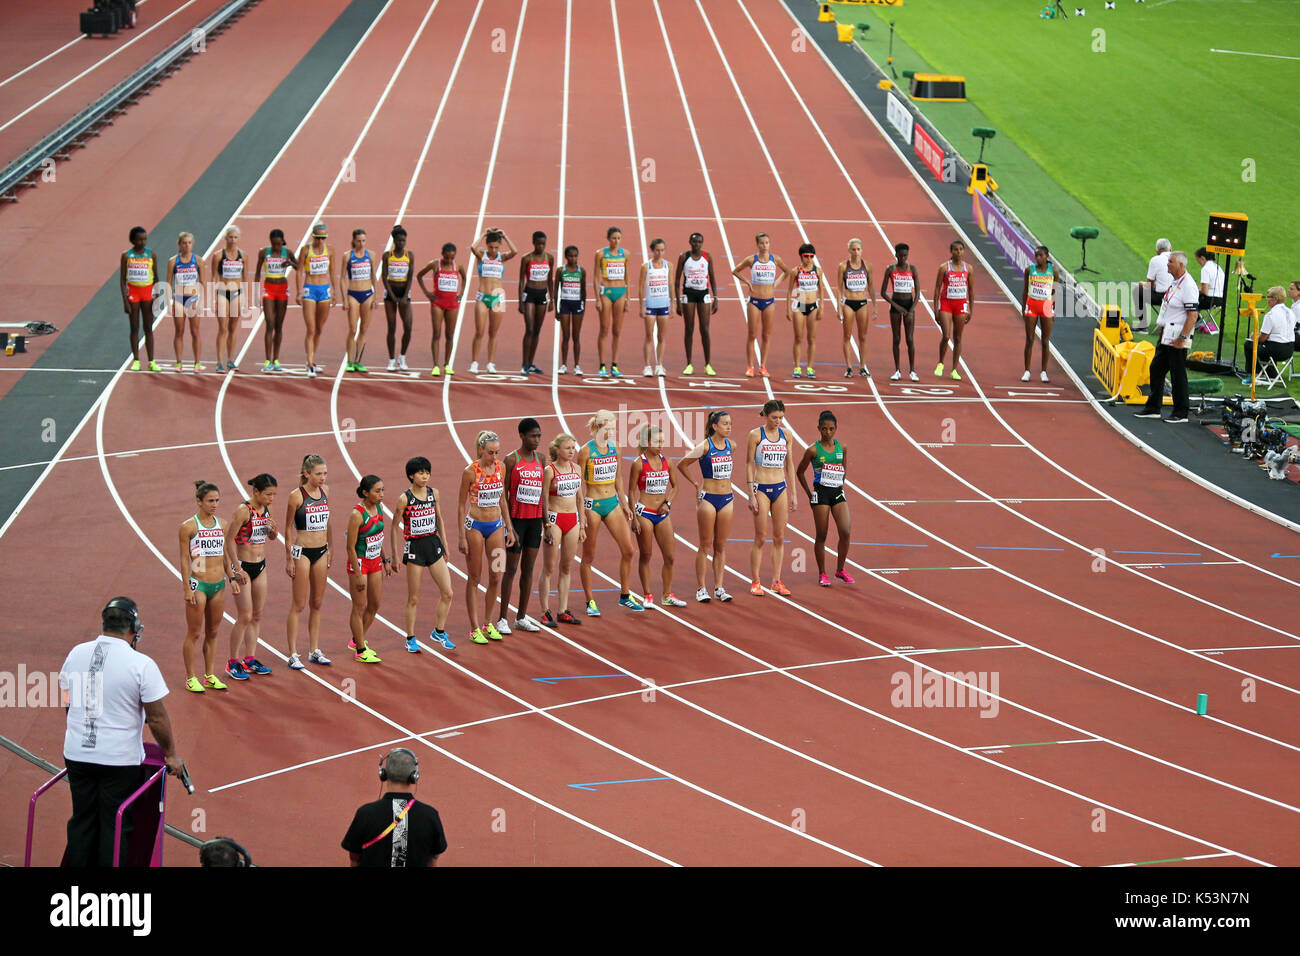 Start of the Women's 10000m Final at the 2017, IAAF World Championships, Queen Elizabeth Olympic Park, Stratford, London, UK. Stock Photo